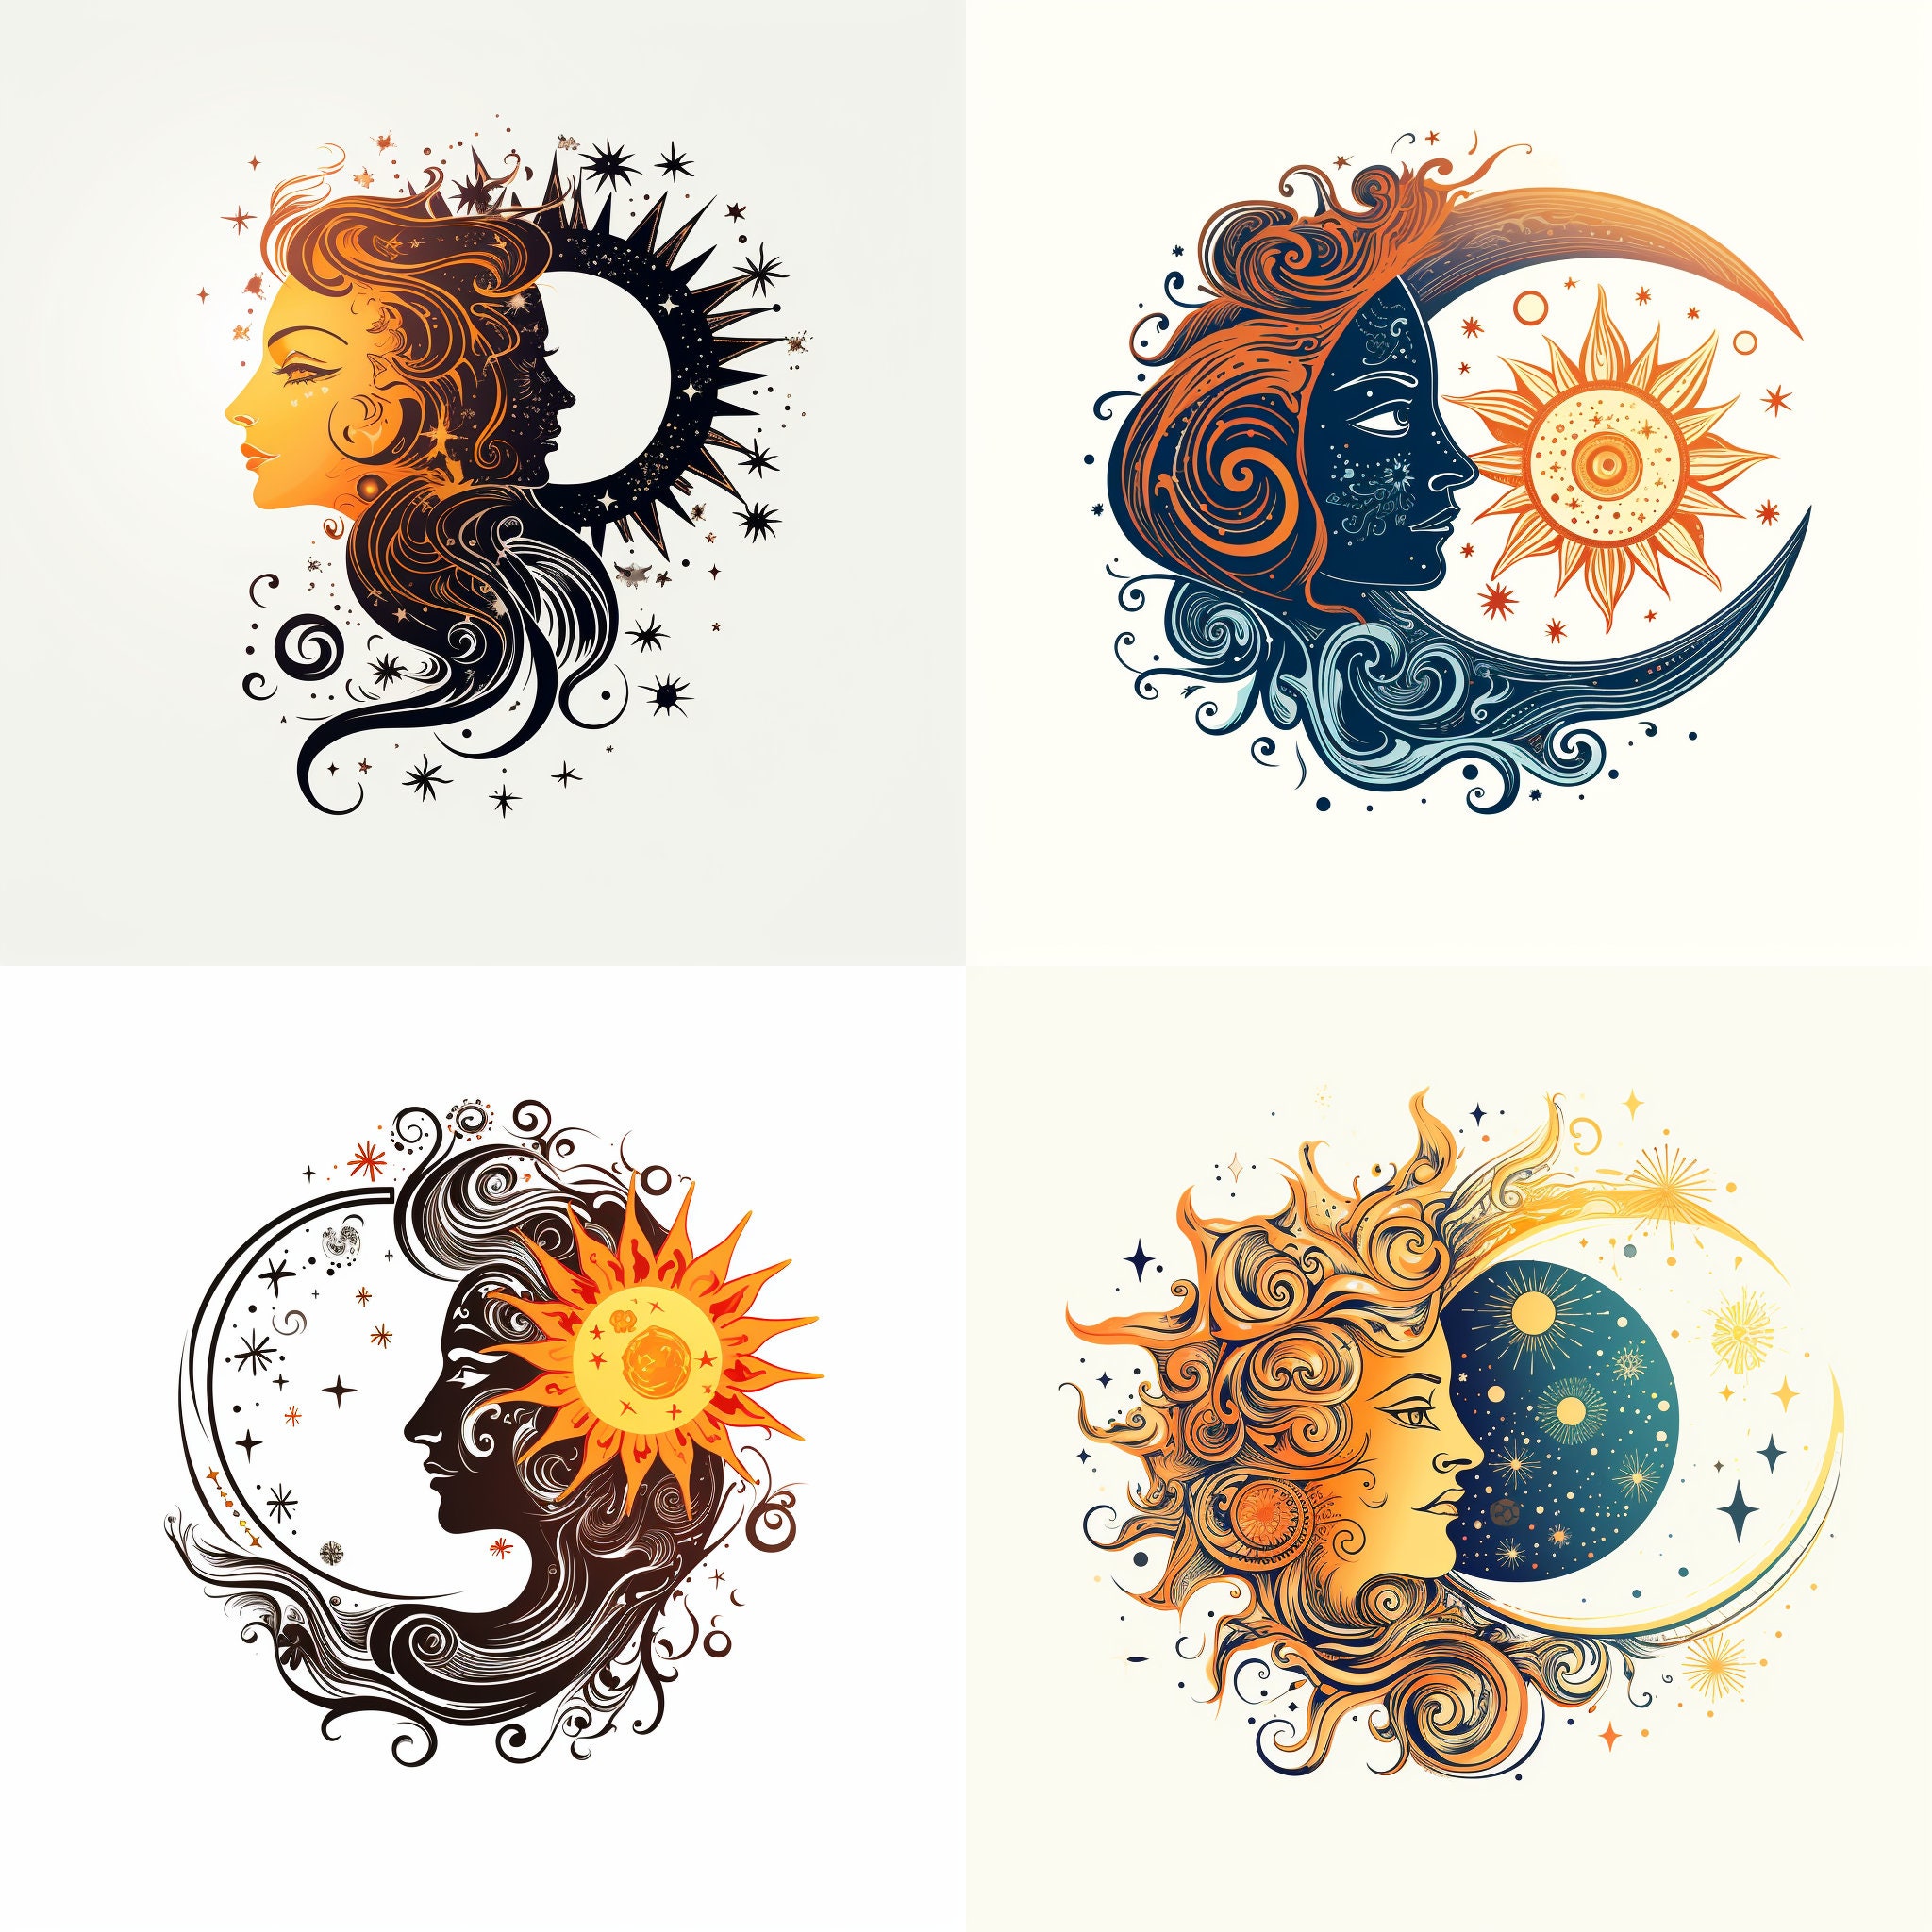 Custom Tattoo Designs - An arrow and moon tattoo can symbolize many  different things, such as the union of masculine and feminine energies, as  the moon is often viewed as having female